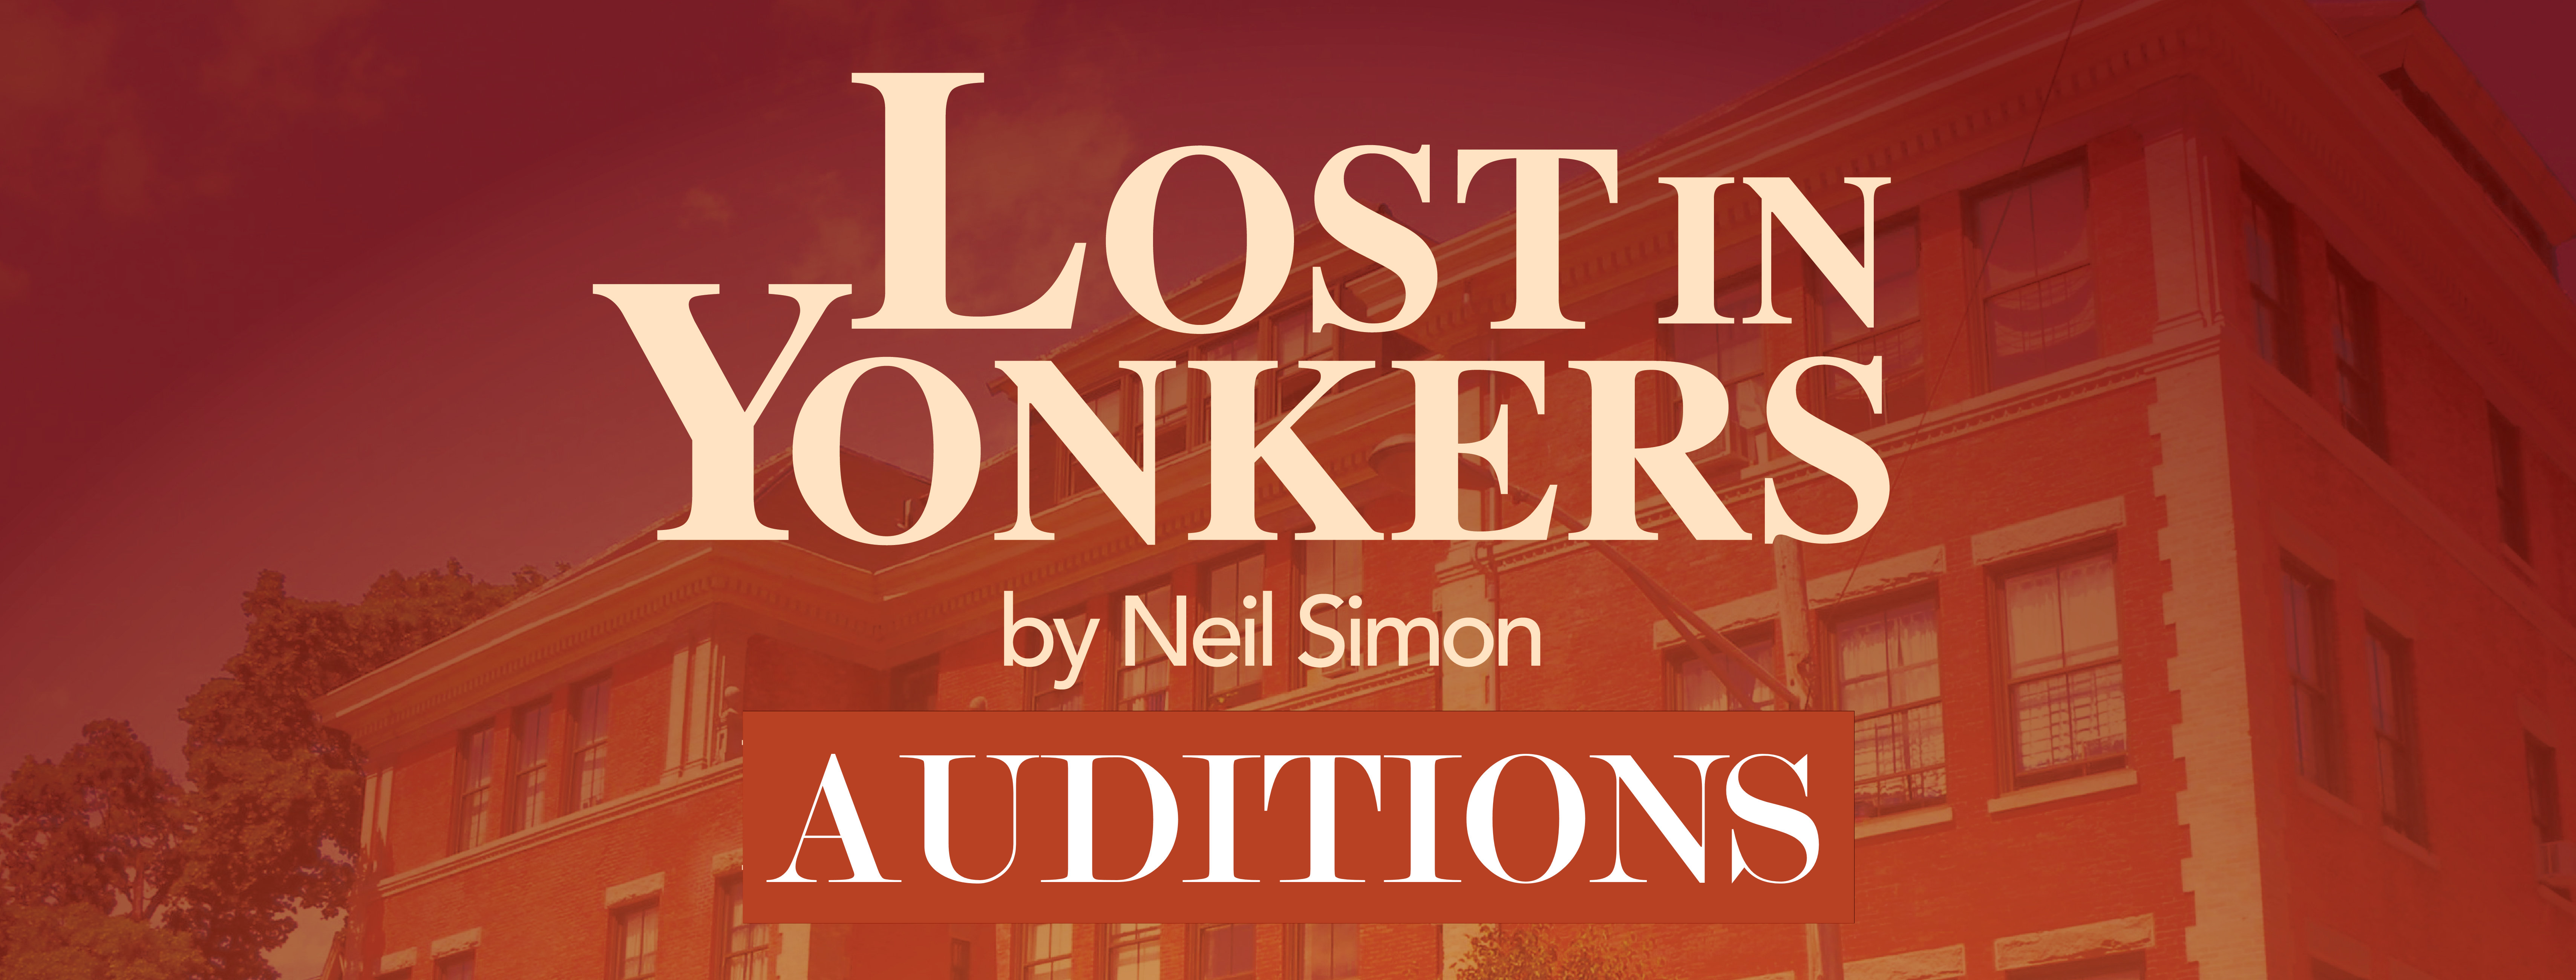 Lost in Yonkers Auditions